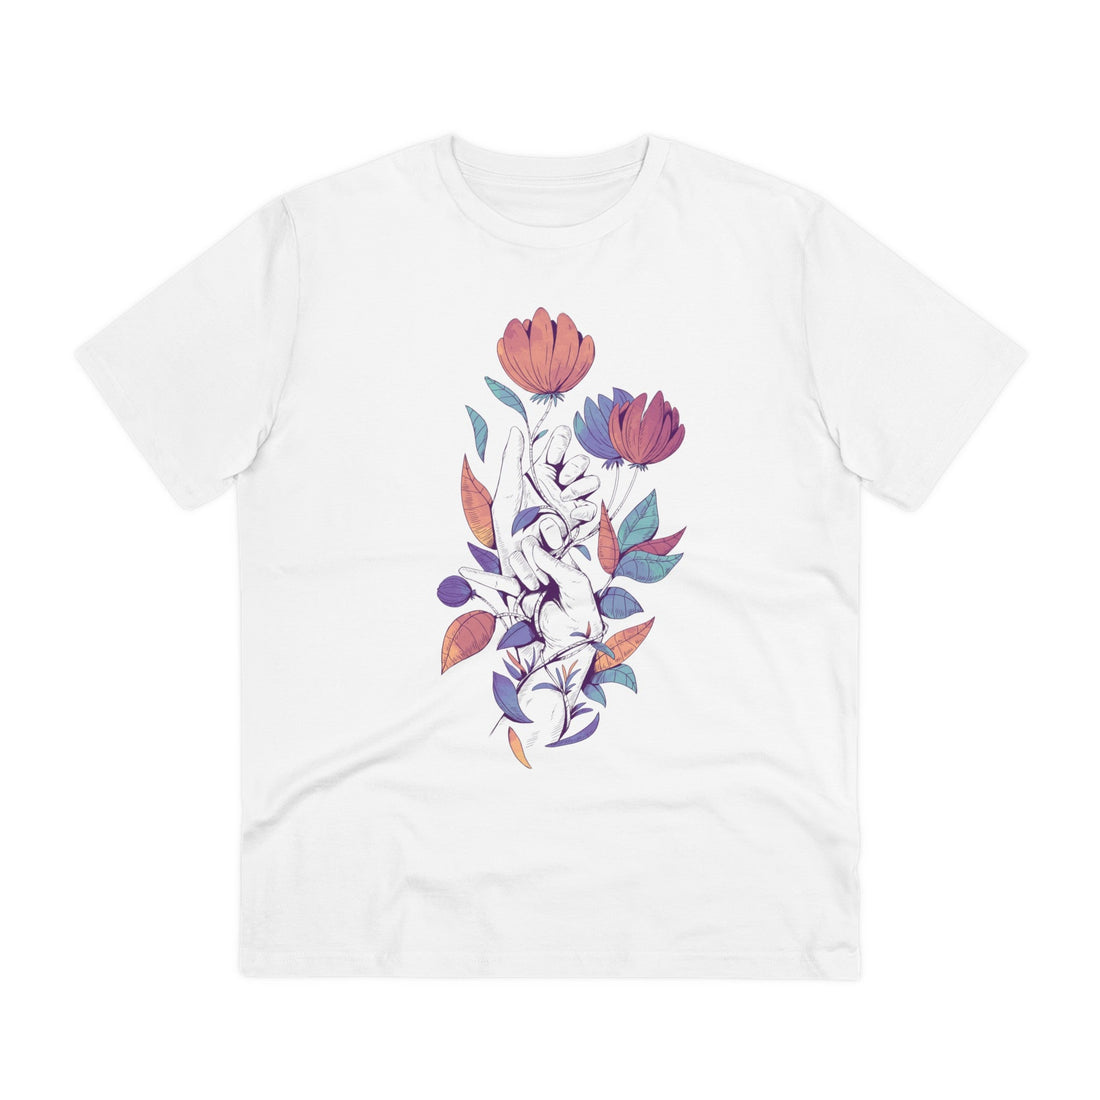 Printify T-Shirt White / 2XS Color leaves and hands - Floral Hands - Front Design